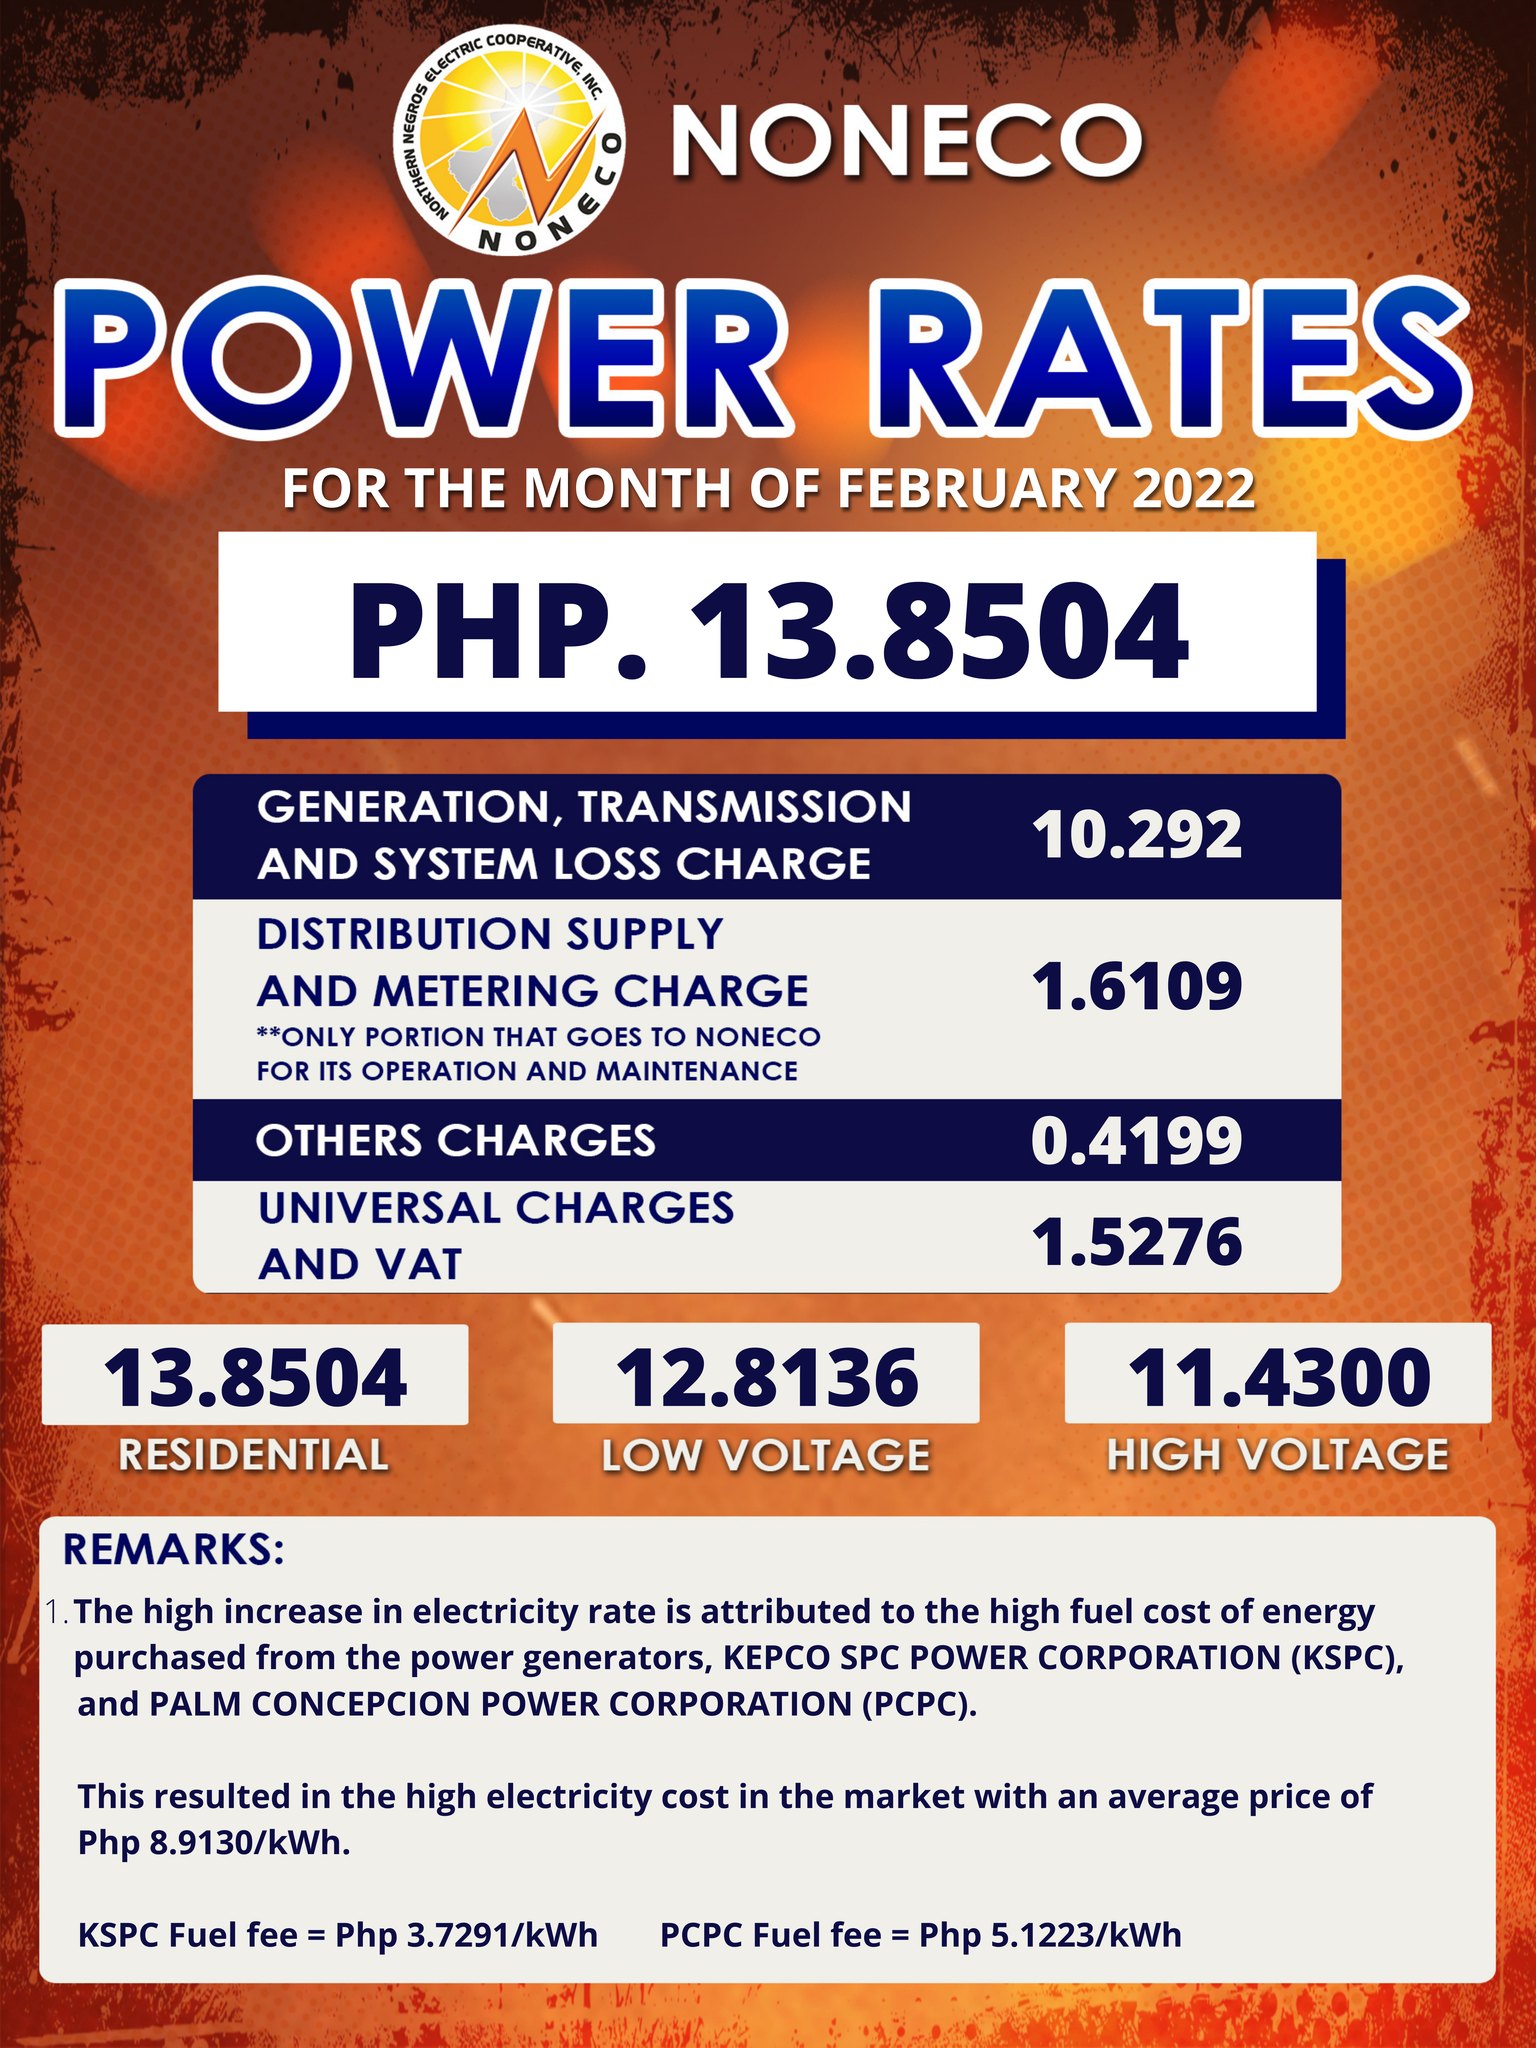 Power Rates for the Month of February 2022